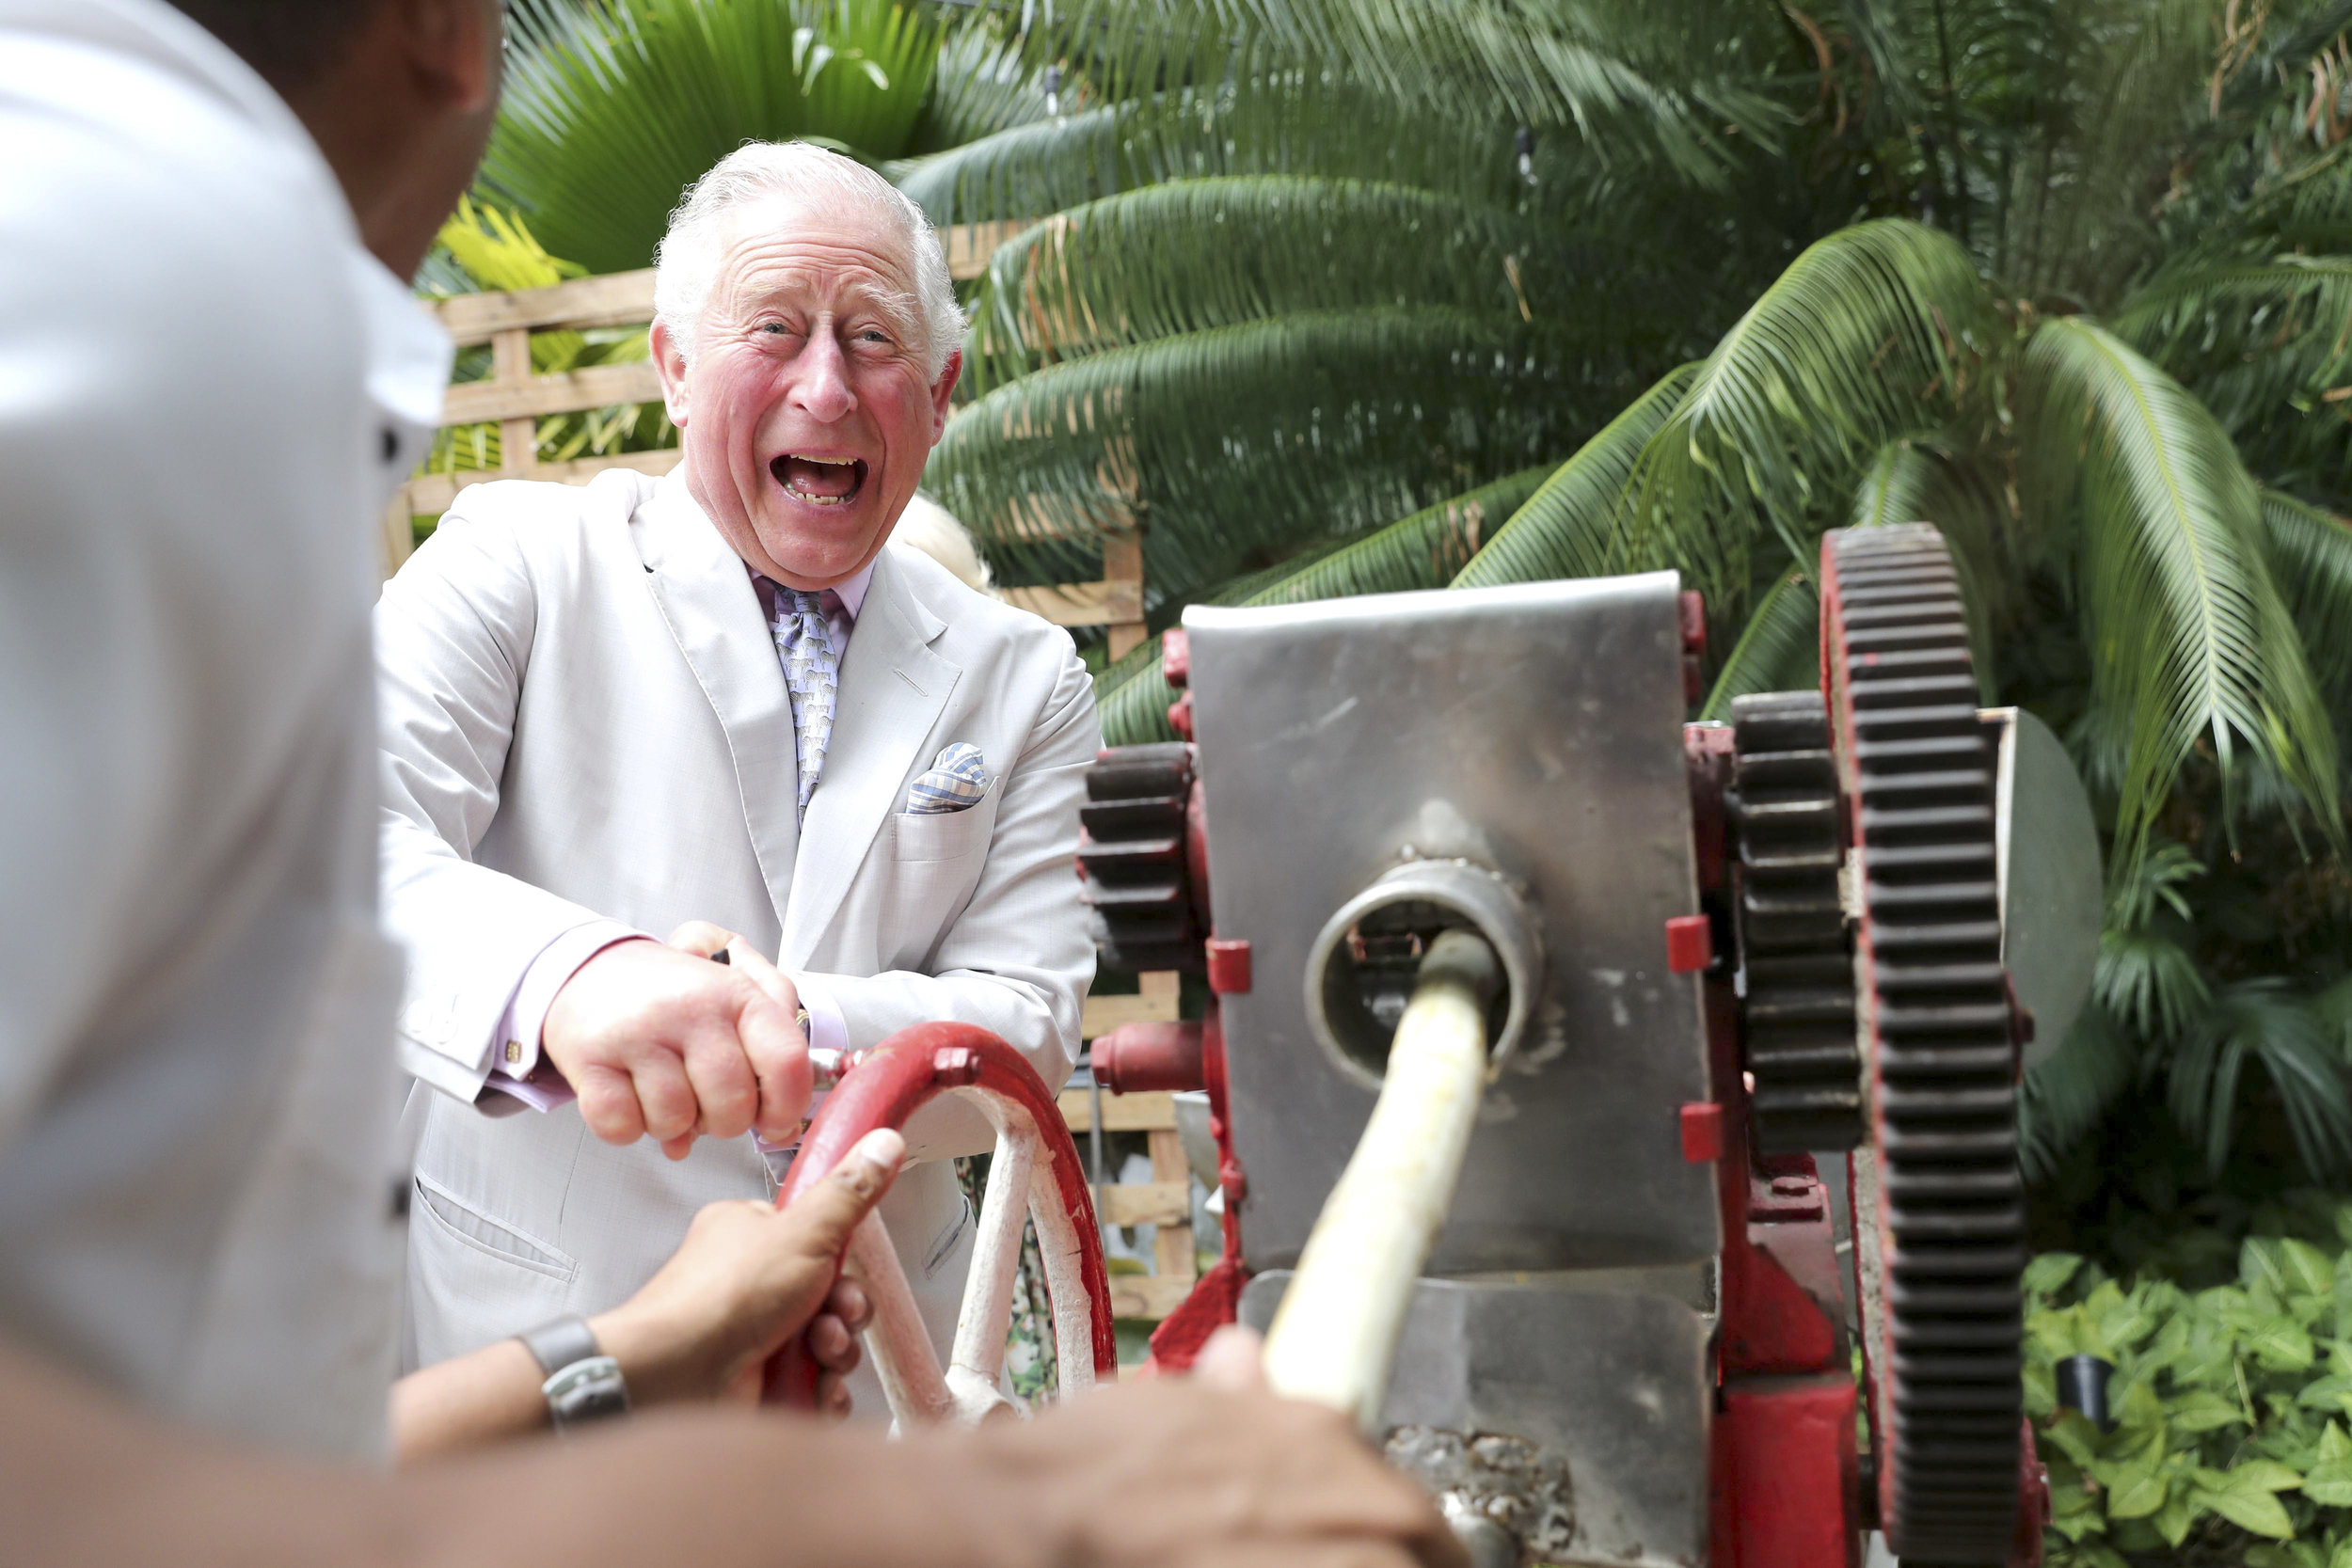  Prince Charles, Prince of Wales grinds sugar cane during a visit to Habanera, a privately owned restaurant in Havana, Cuba. Their Royal Highnesses have made history by becoming the first members of the royal family to visit Cuba in an official capac